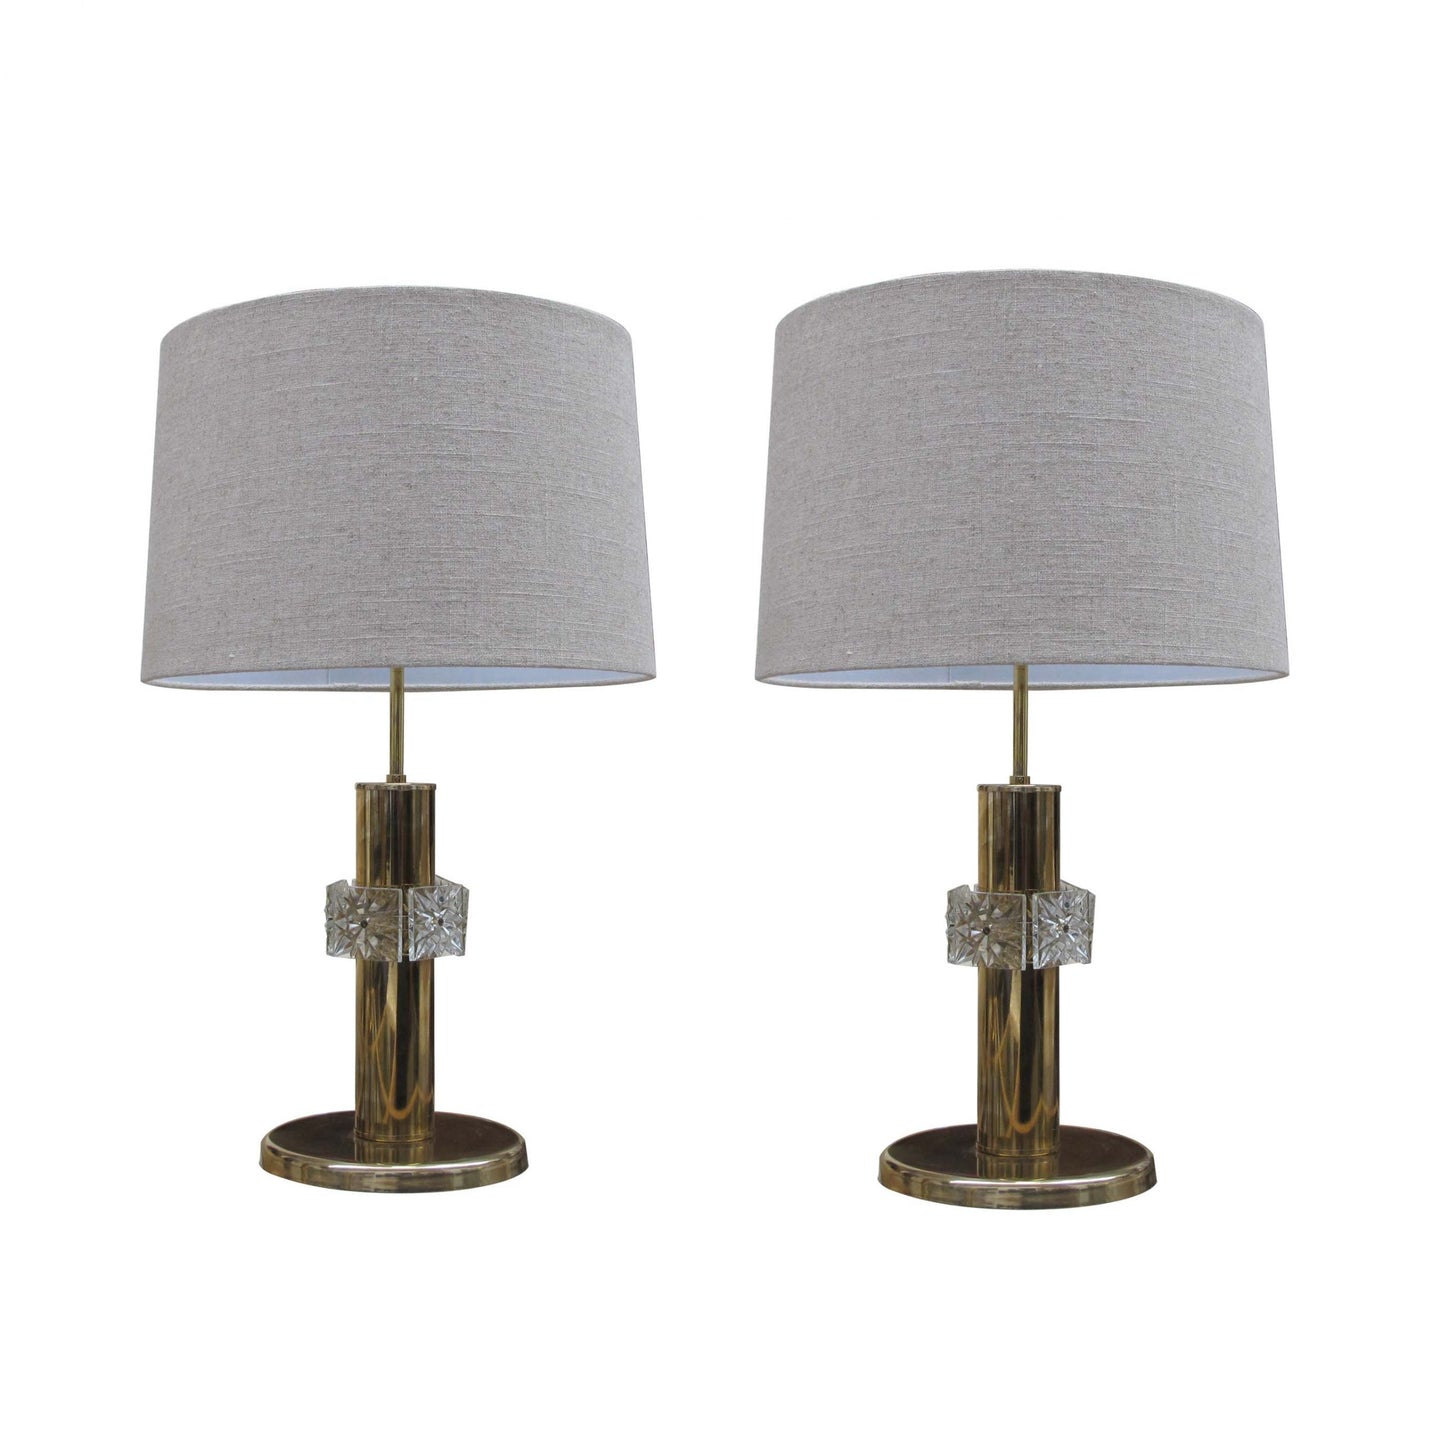 Vintage brass table lamps